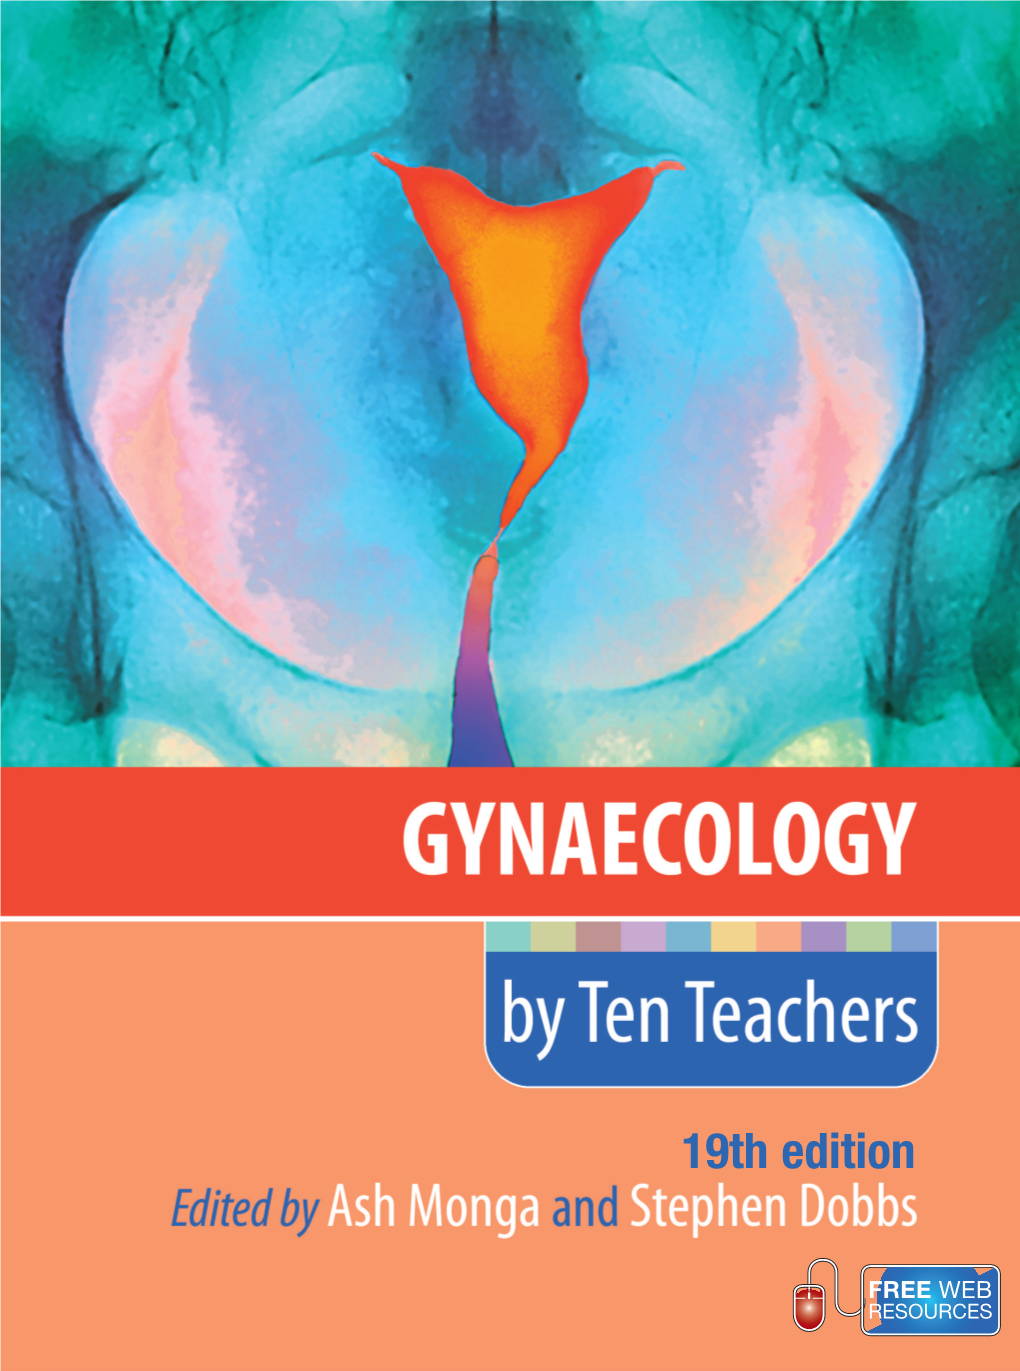 Gynaecology by Ten Teachers Is Well Established As a Concise, Yet Comprehensive, Guide Within Its Field